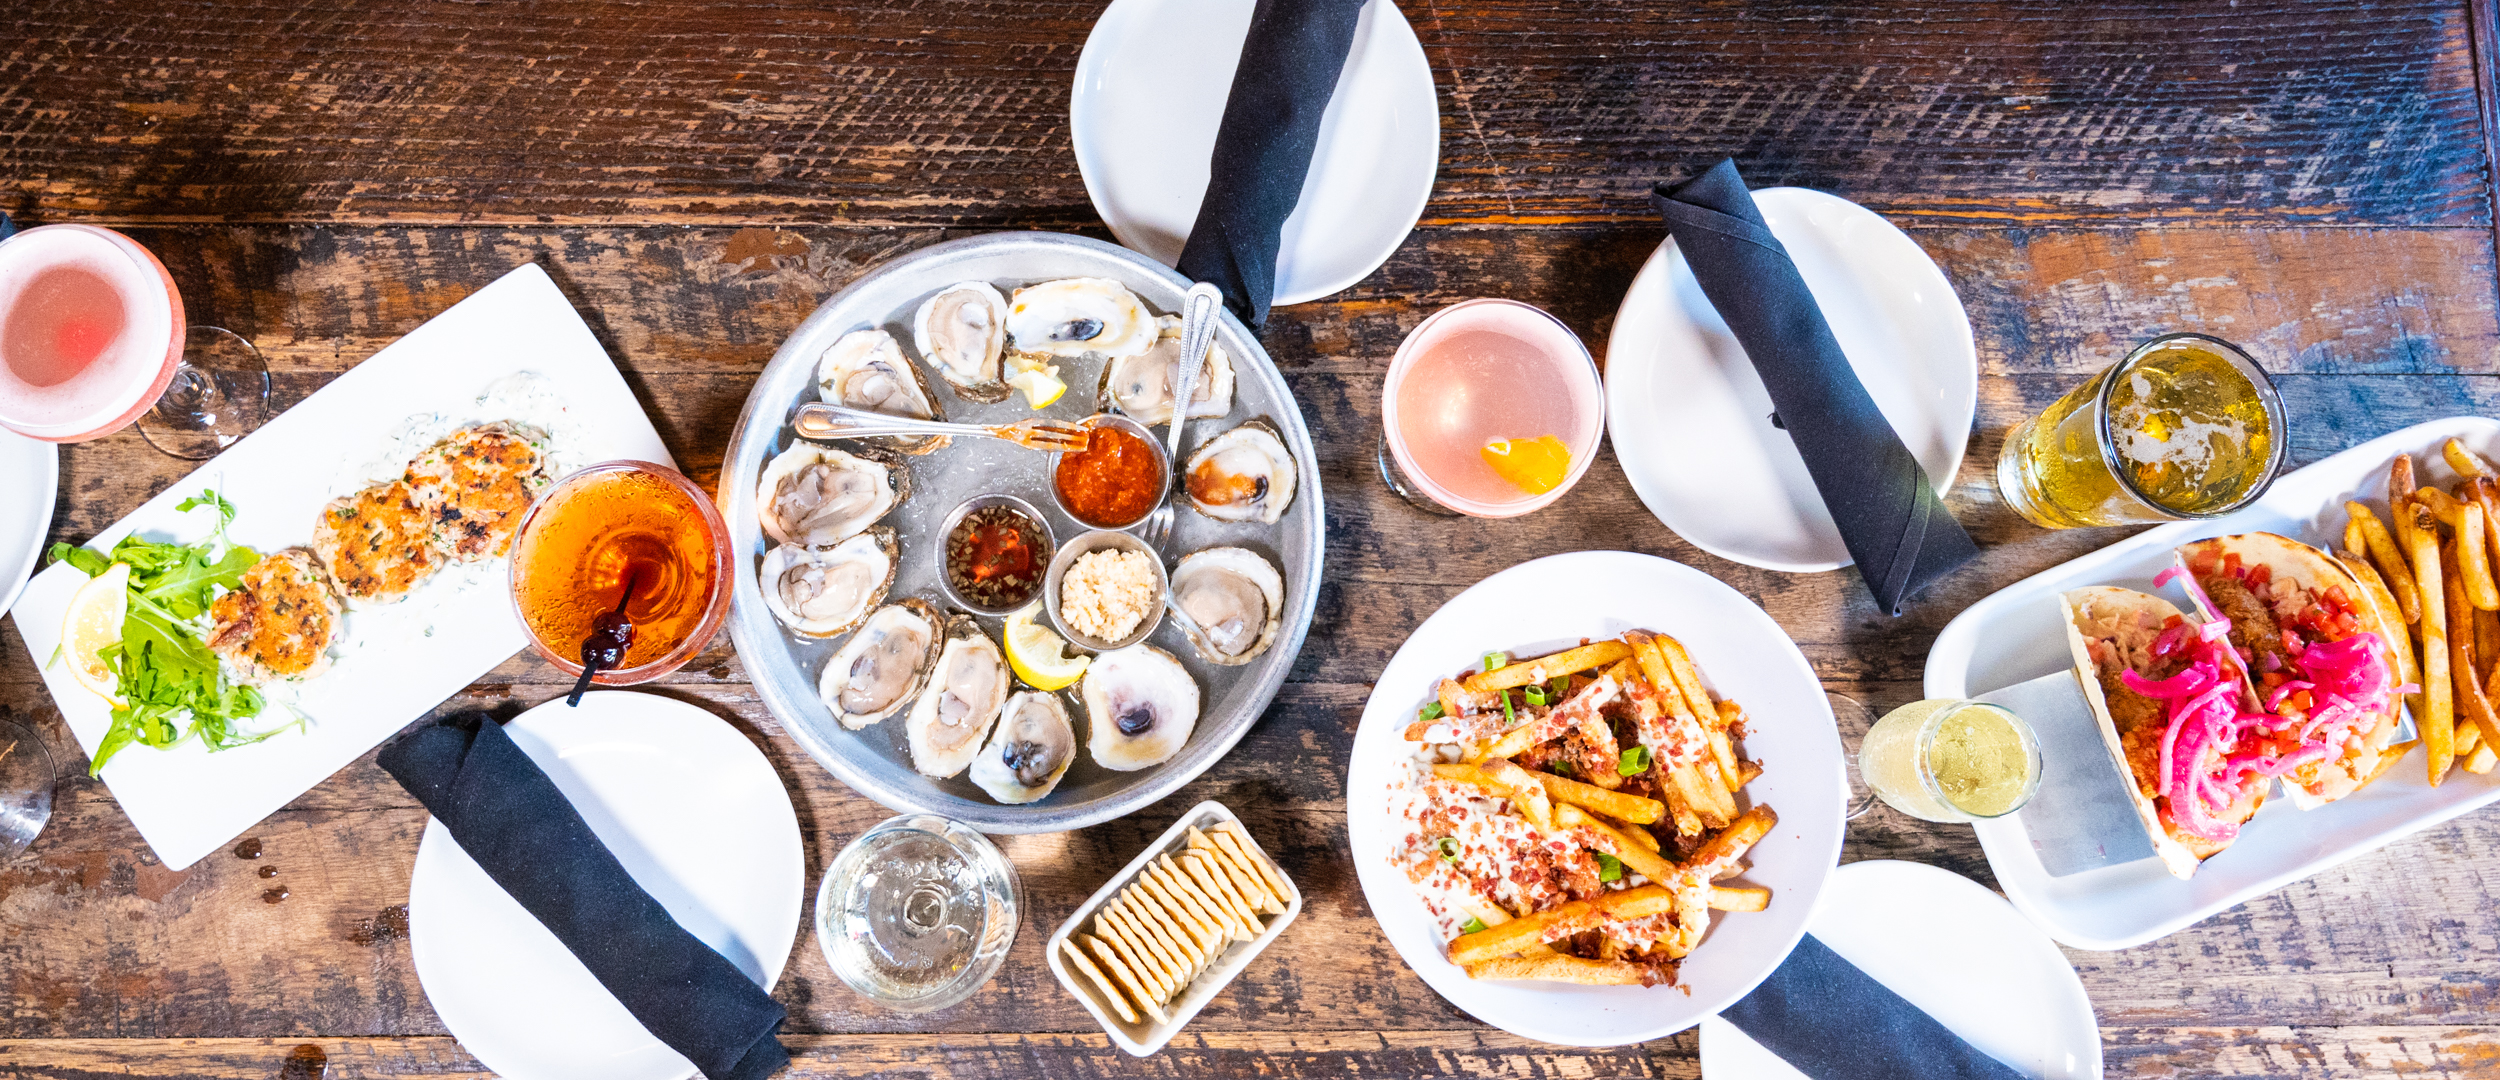 Downtown St. Pete’s Oyster Bar Celebrates “National Oyster Day”